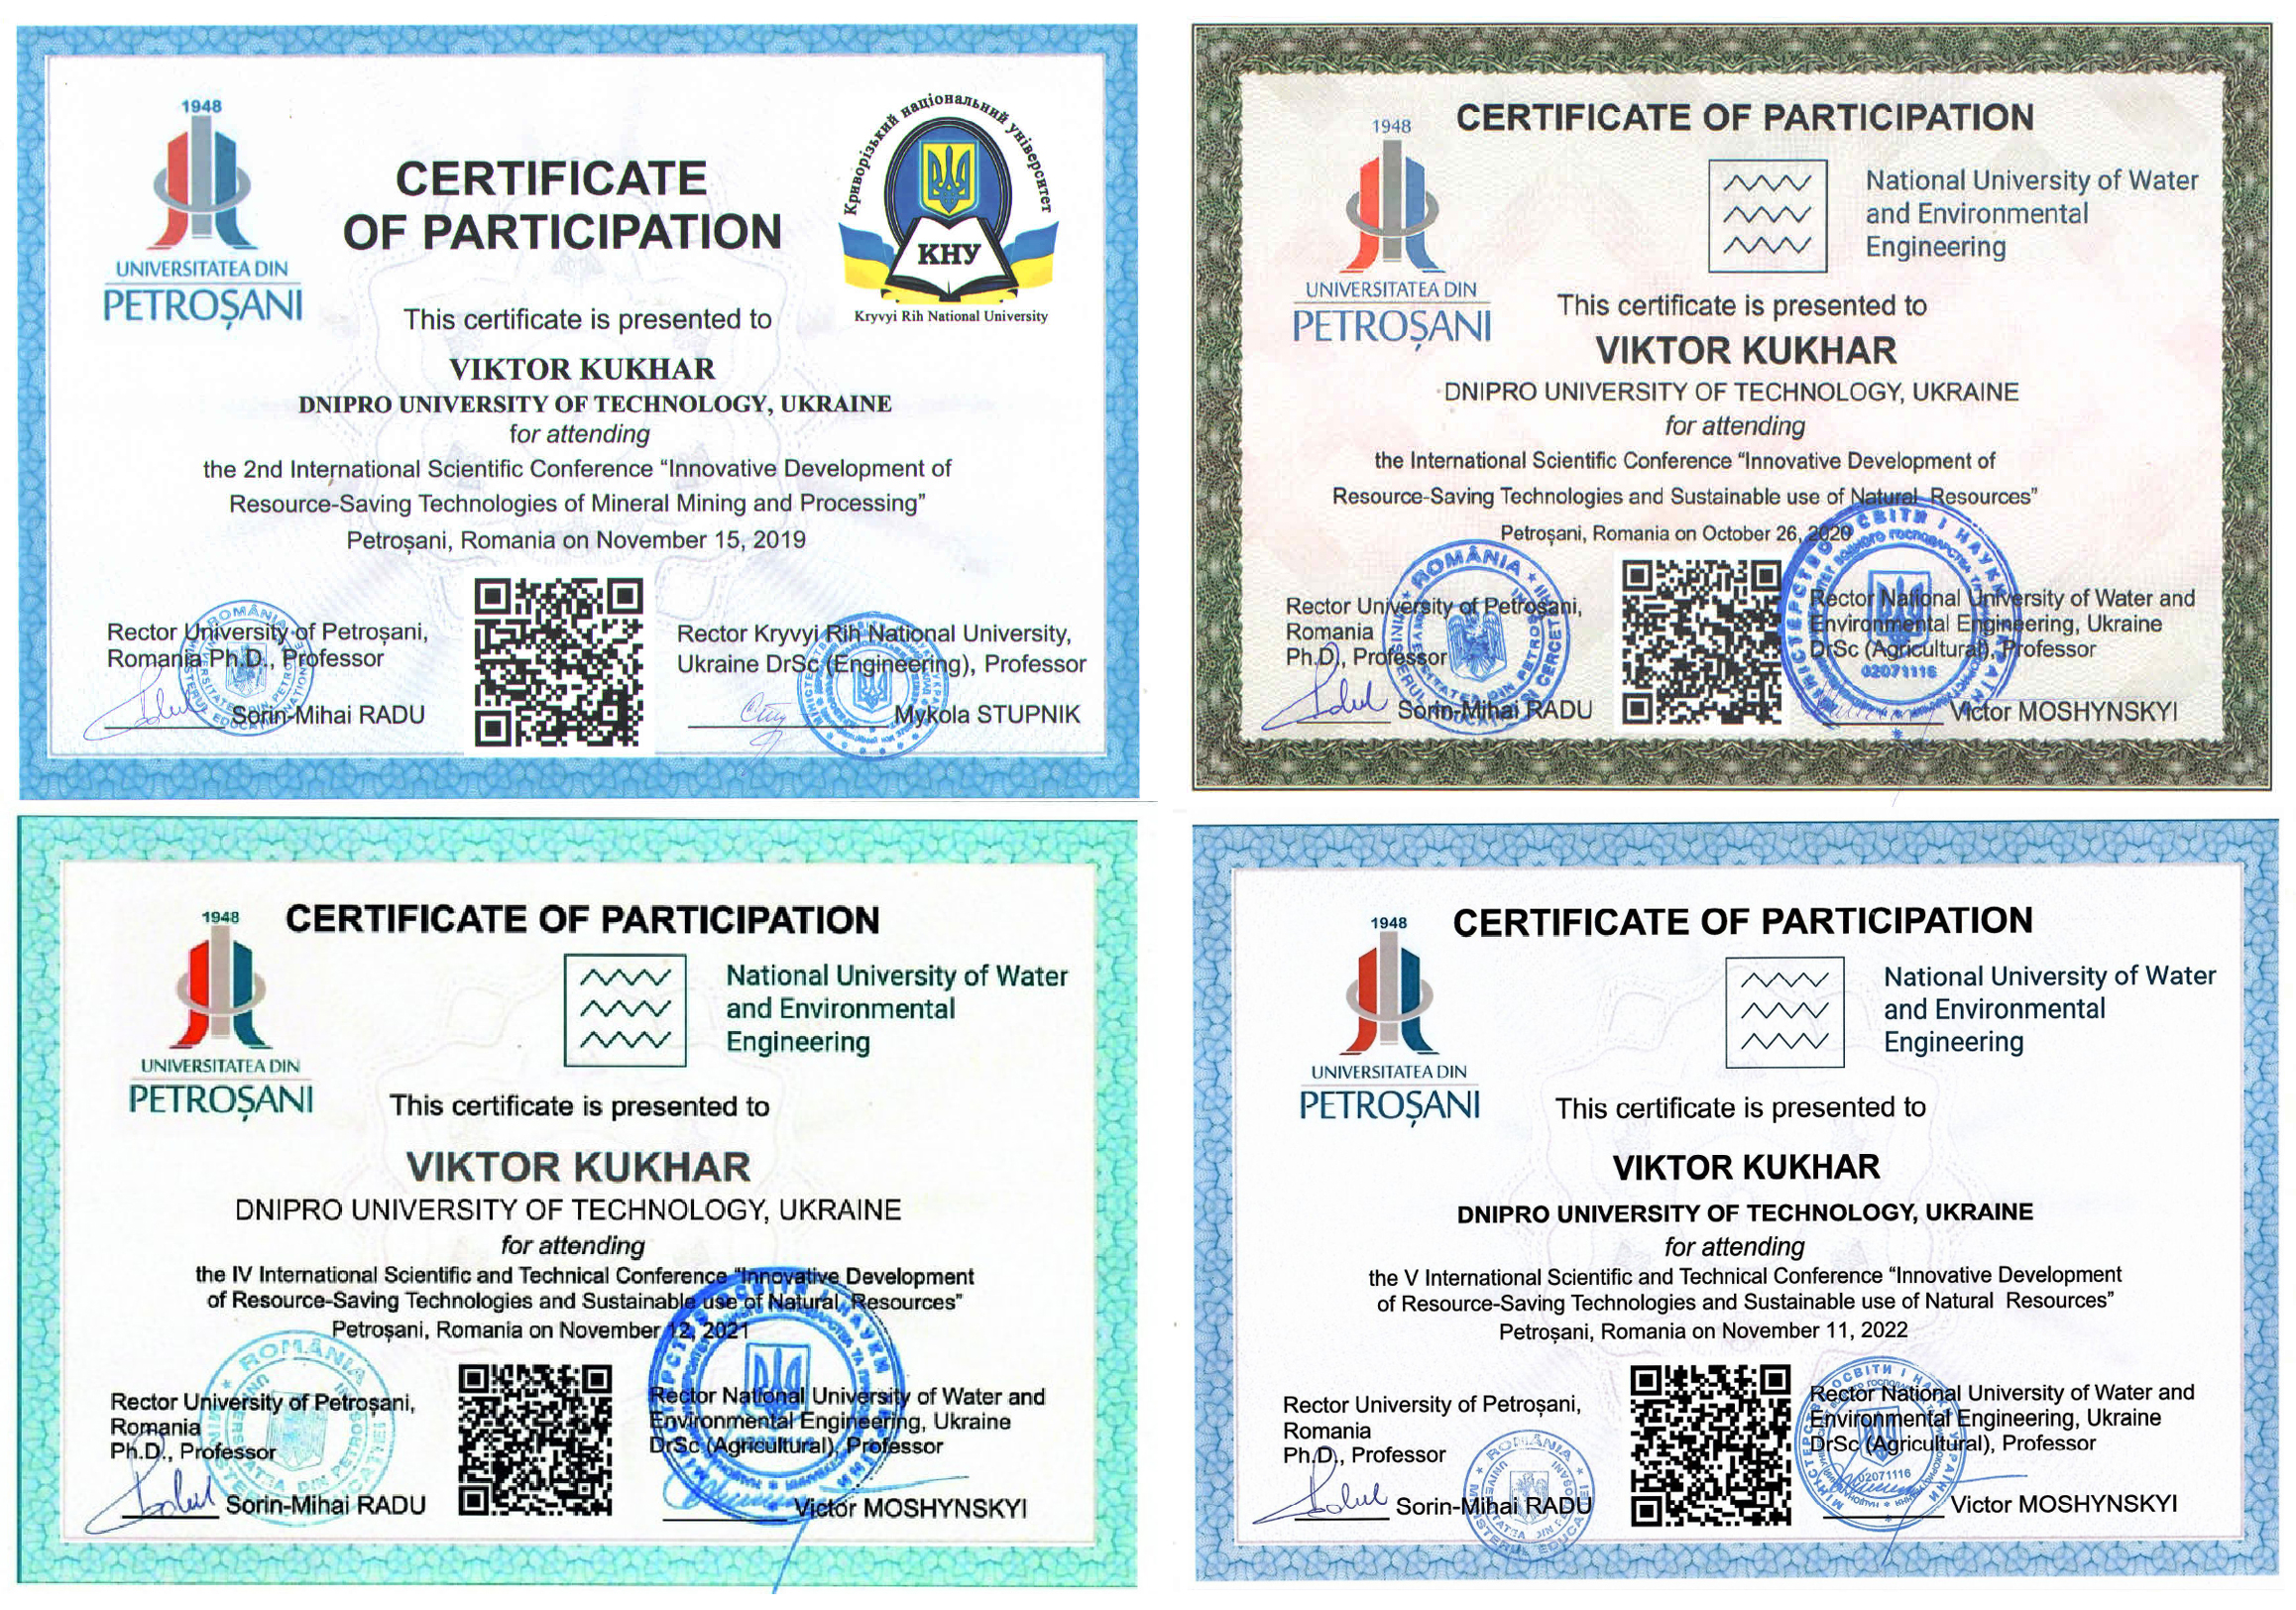 Certificates of participation in international conferences